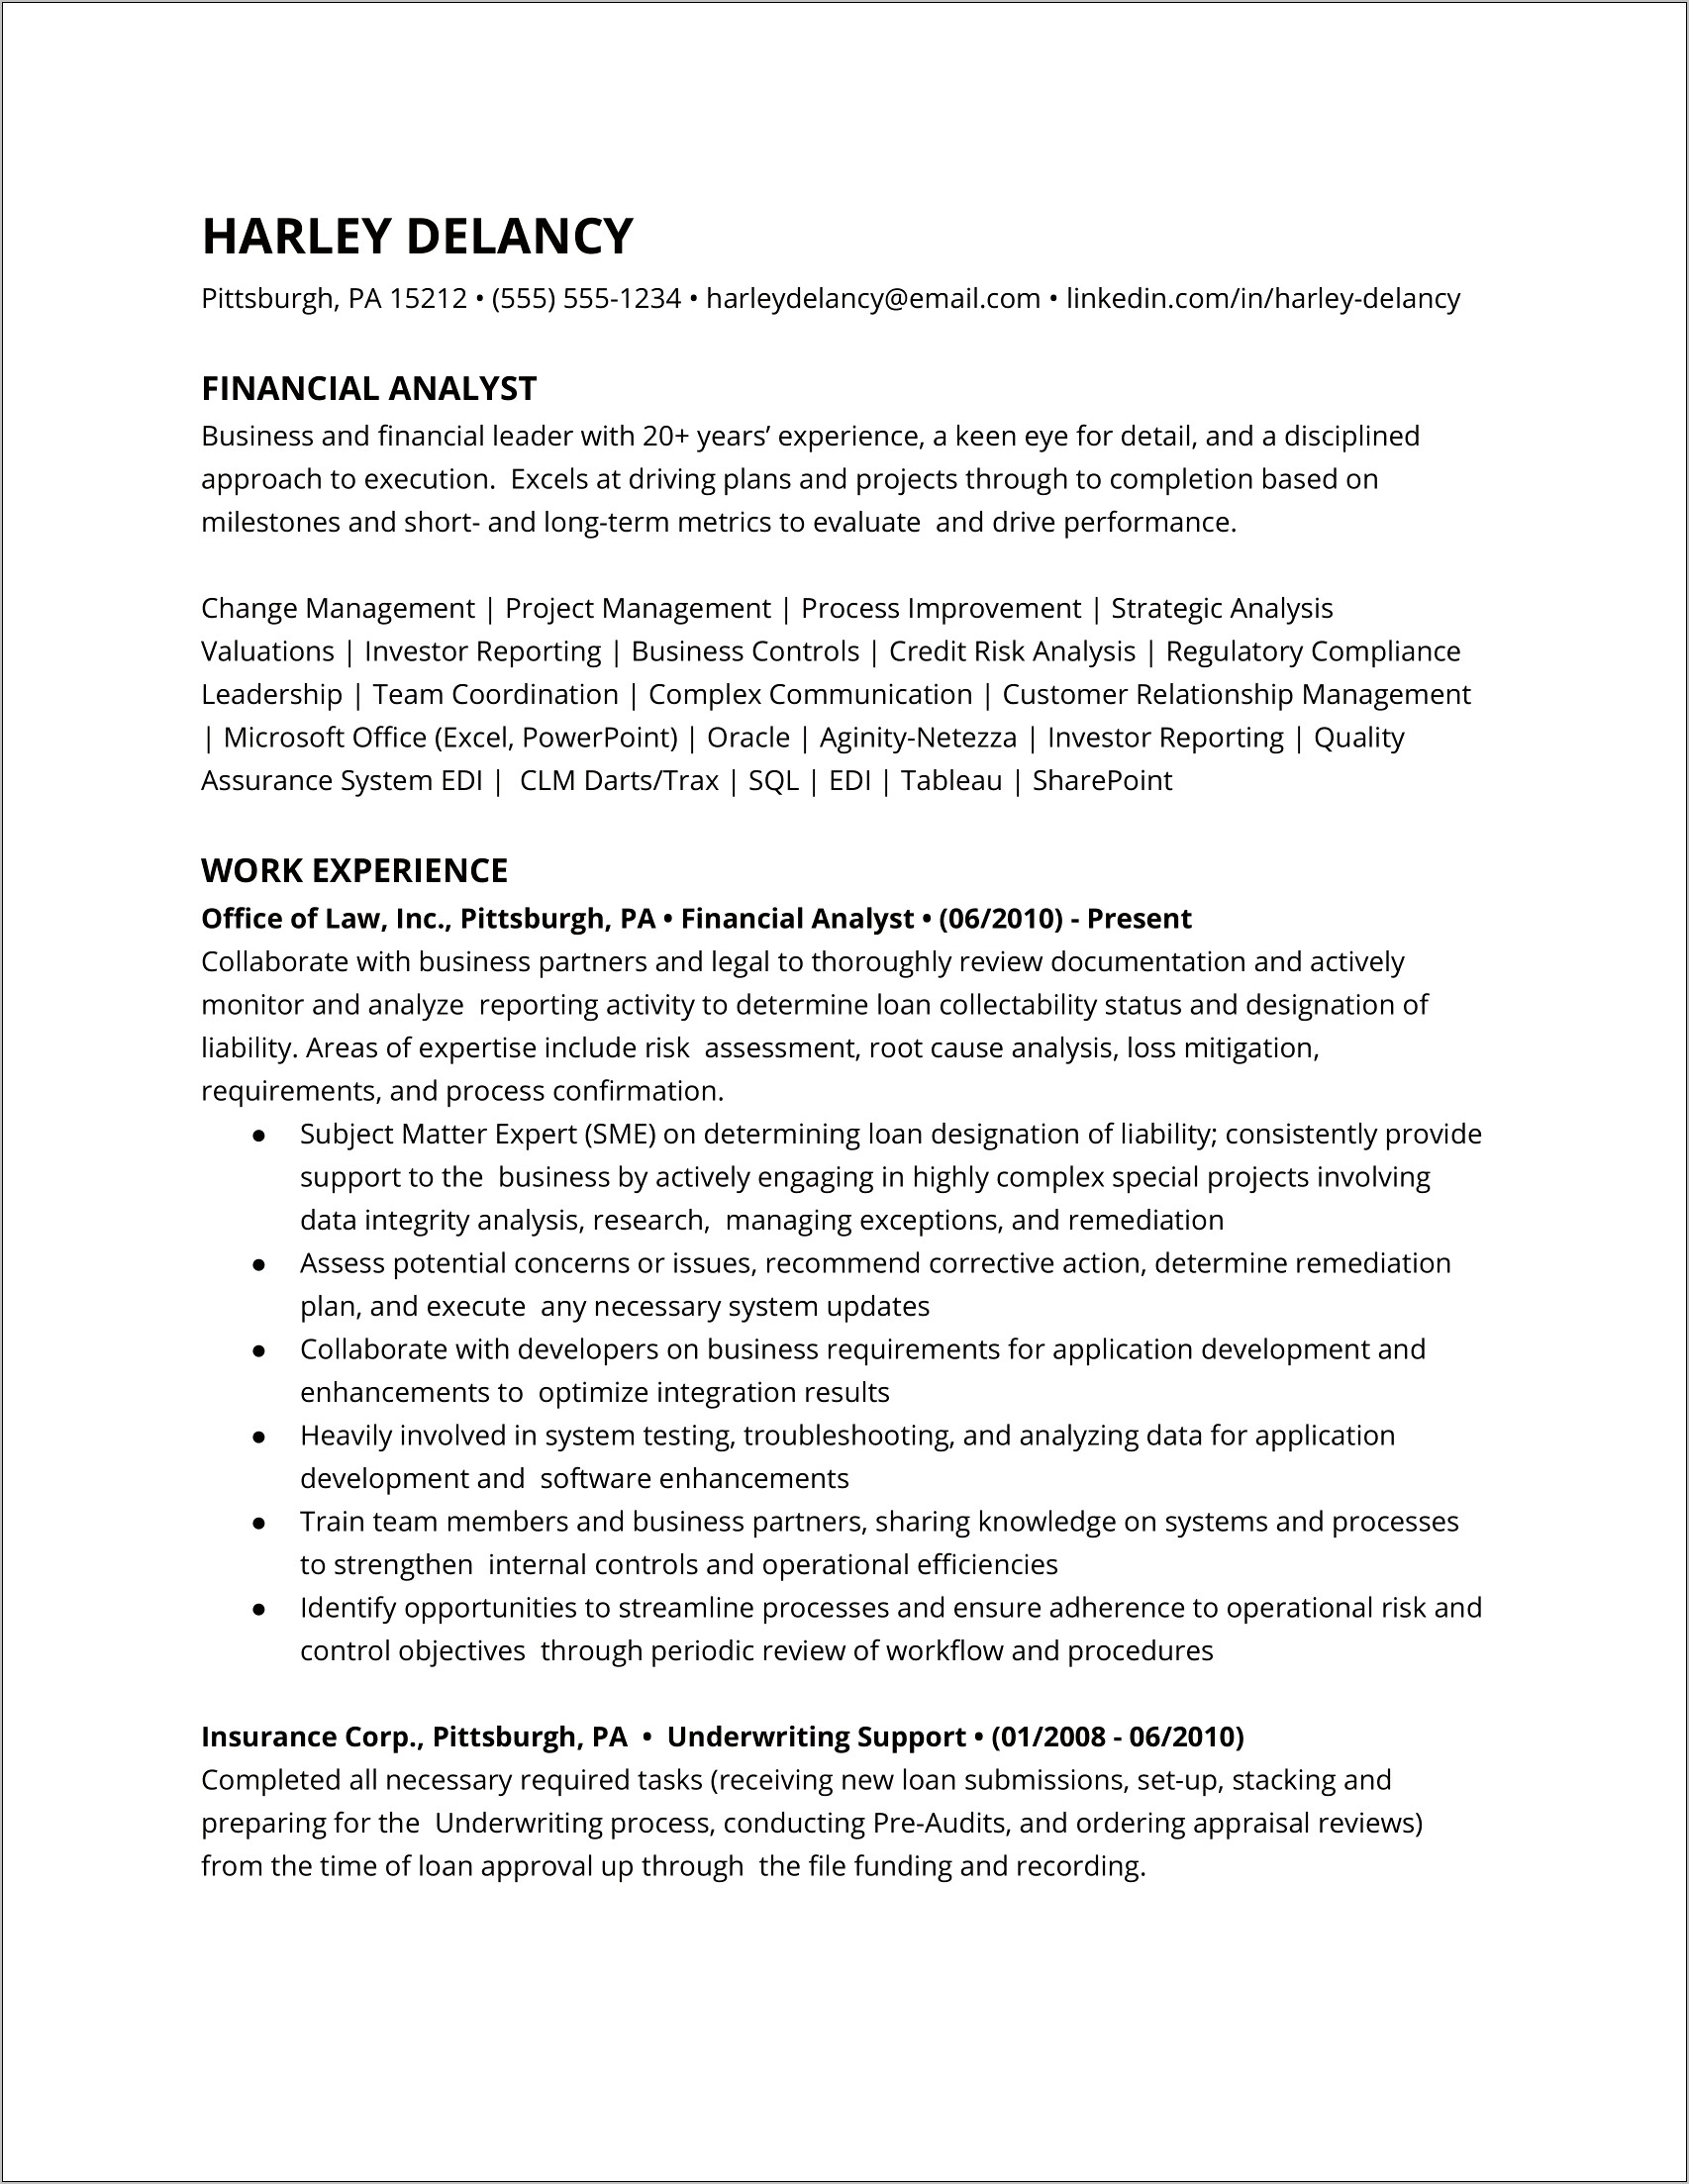 Resume Sample Retirement Operations Specialist